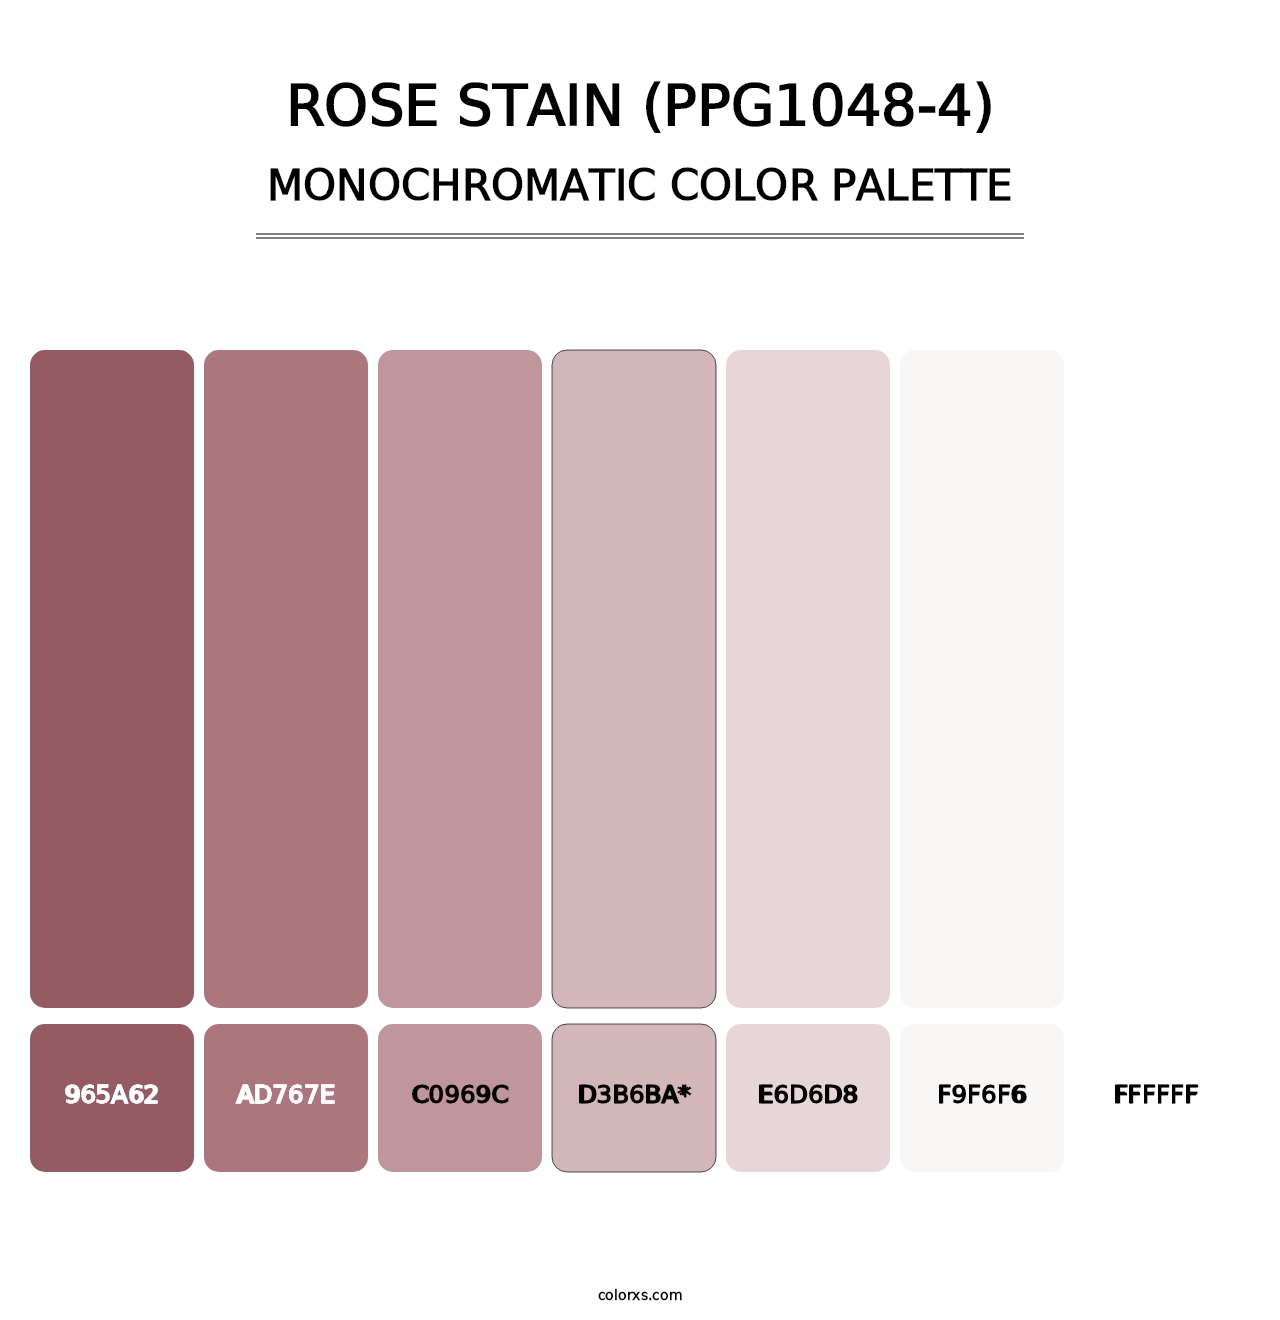 Rose Stain (PPG1048-4) - Monochromatic Color Palette